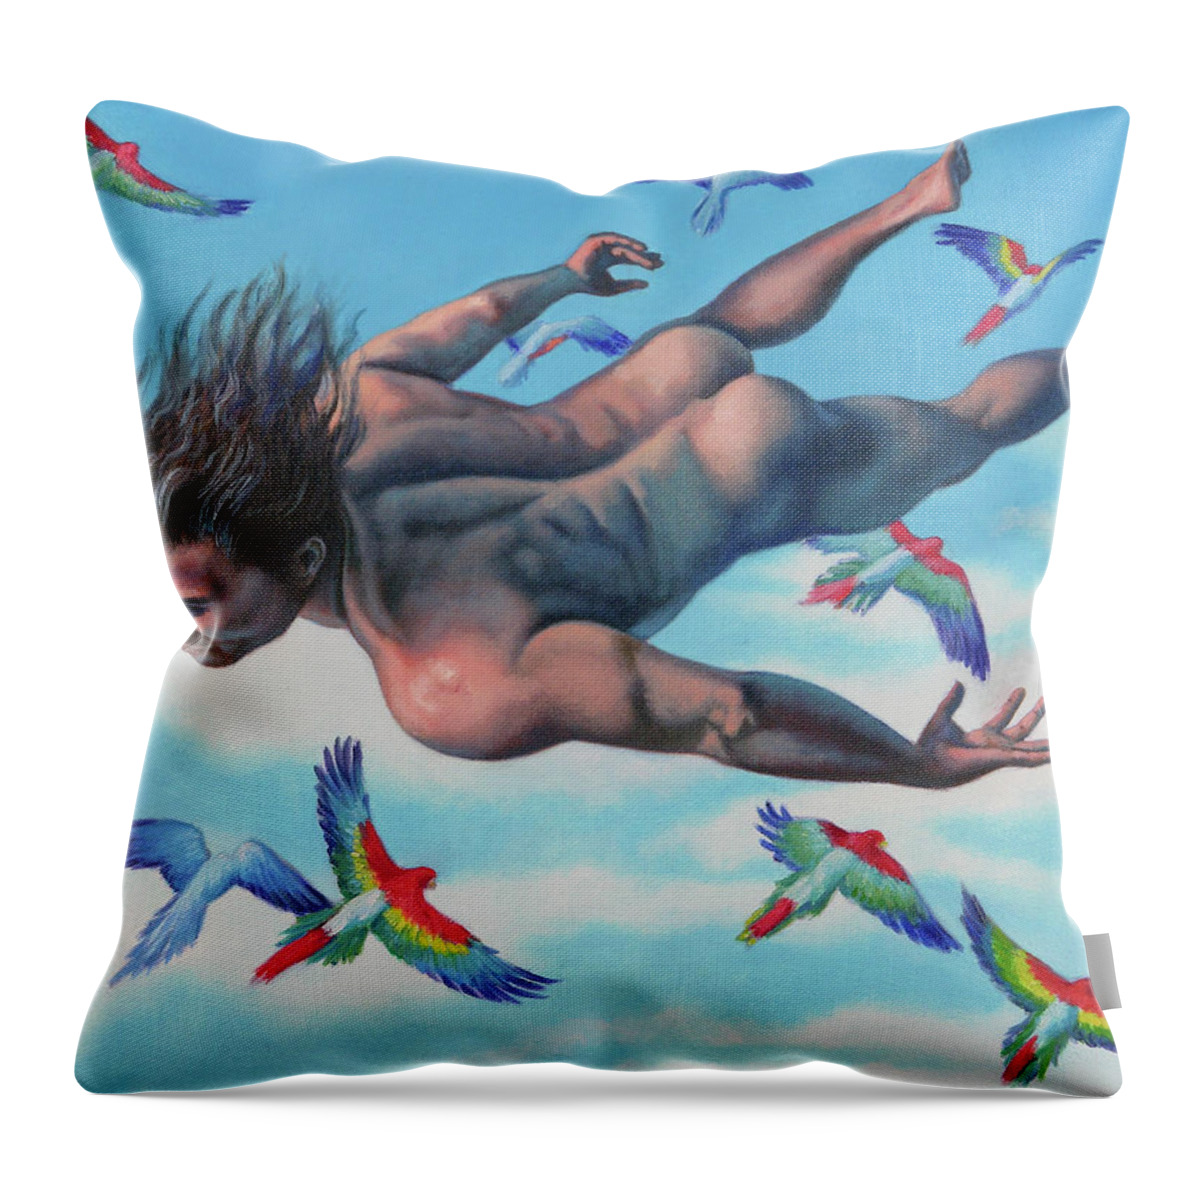 Flying Throw Pillow featuring the painting Flying with Parrots by Miguel Tio